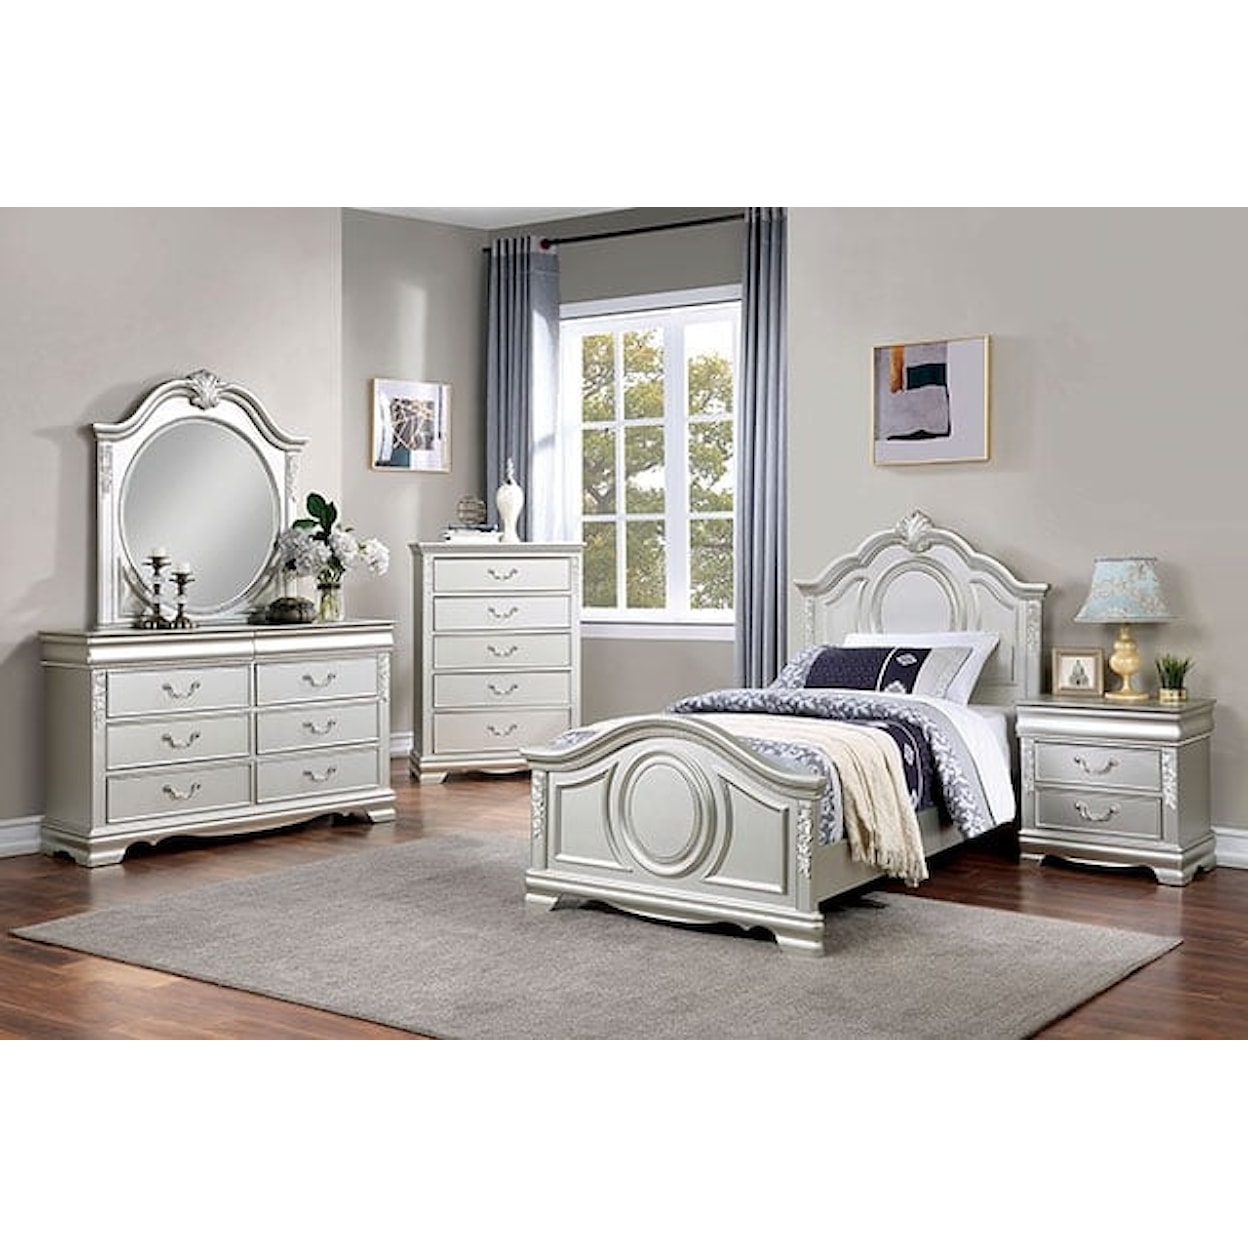 Furniture of America Alecia Twin Bed with Wood Carved Details